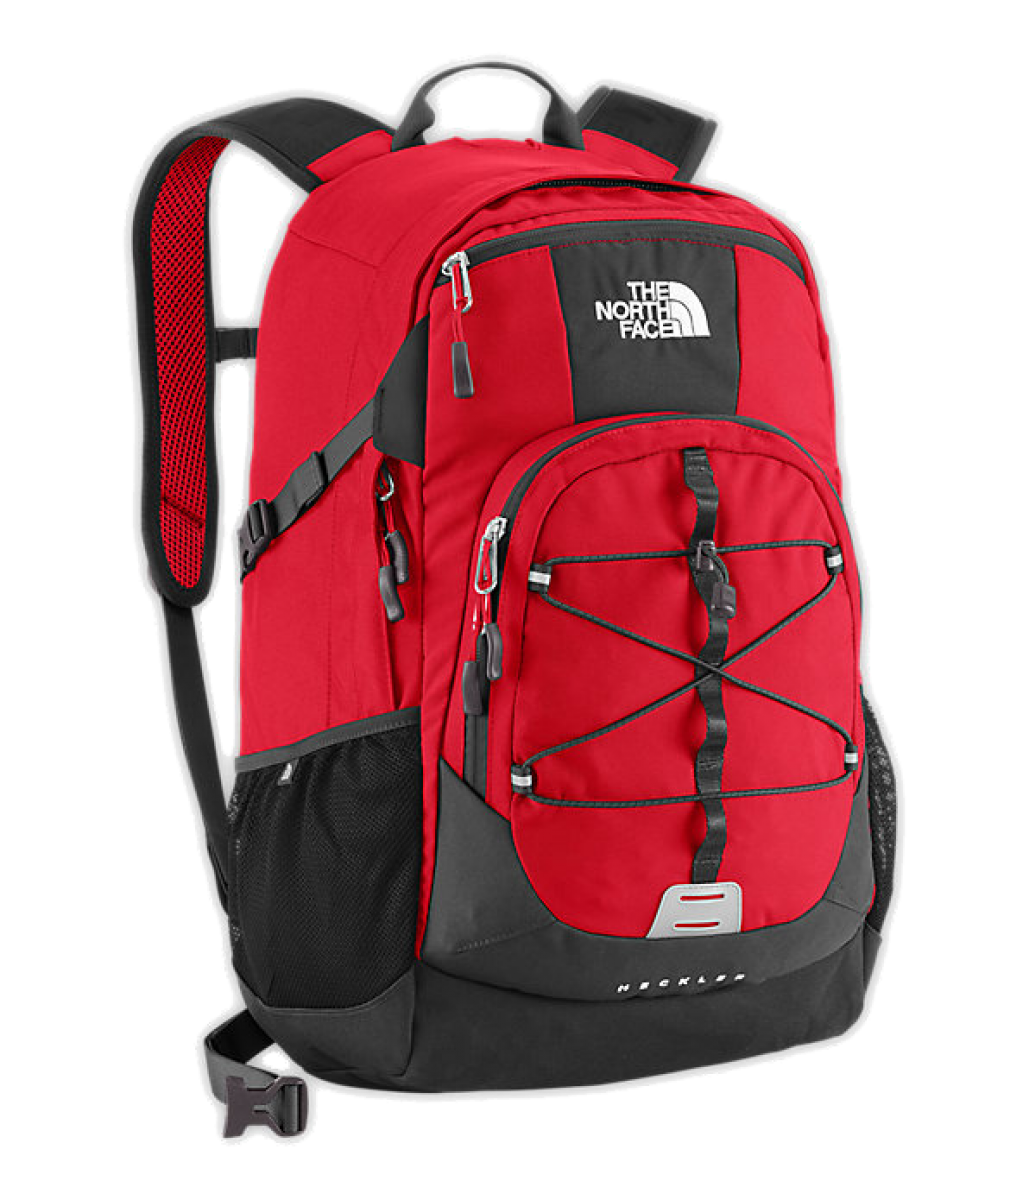 The North Face Hero Bag PNG Image